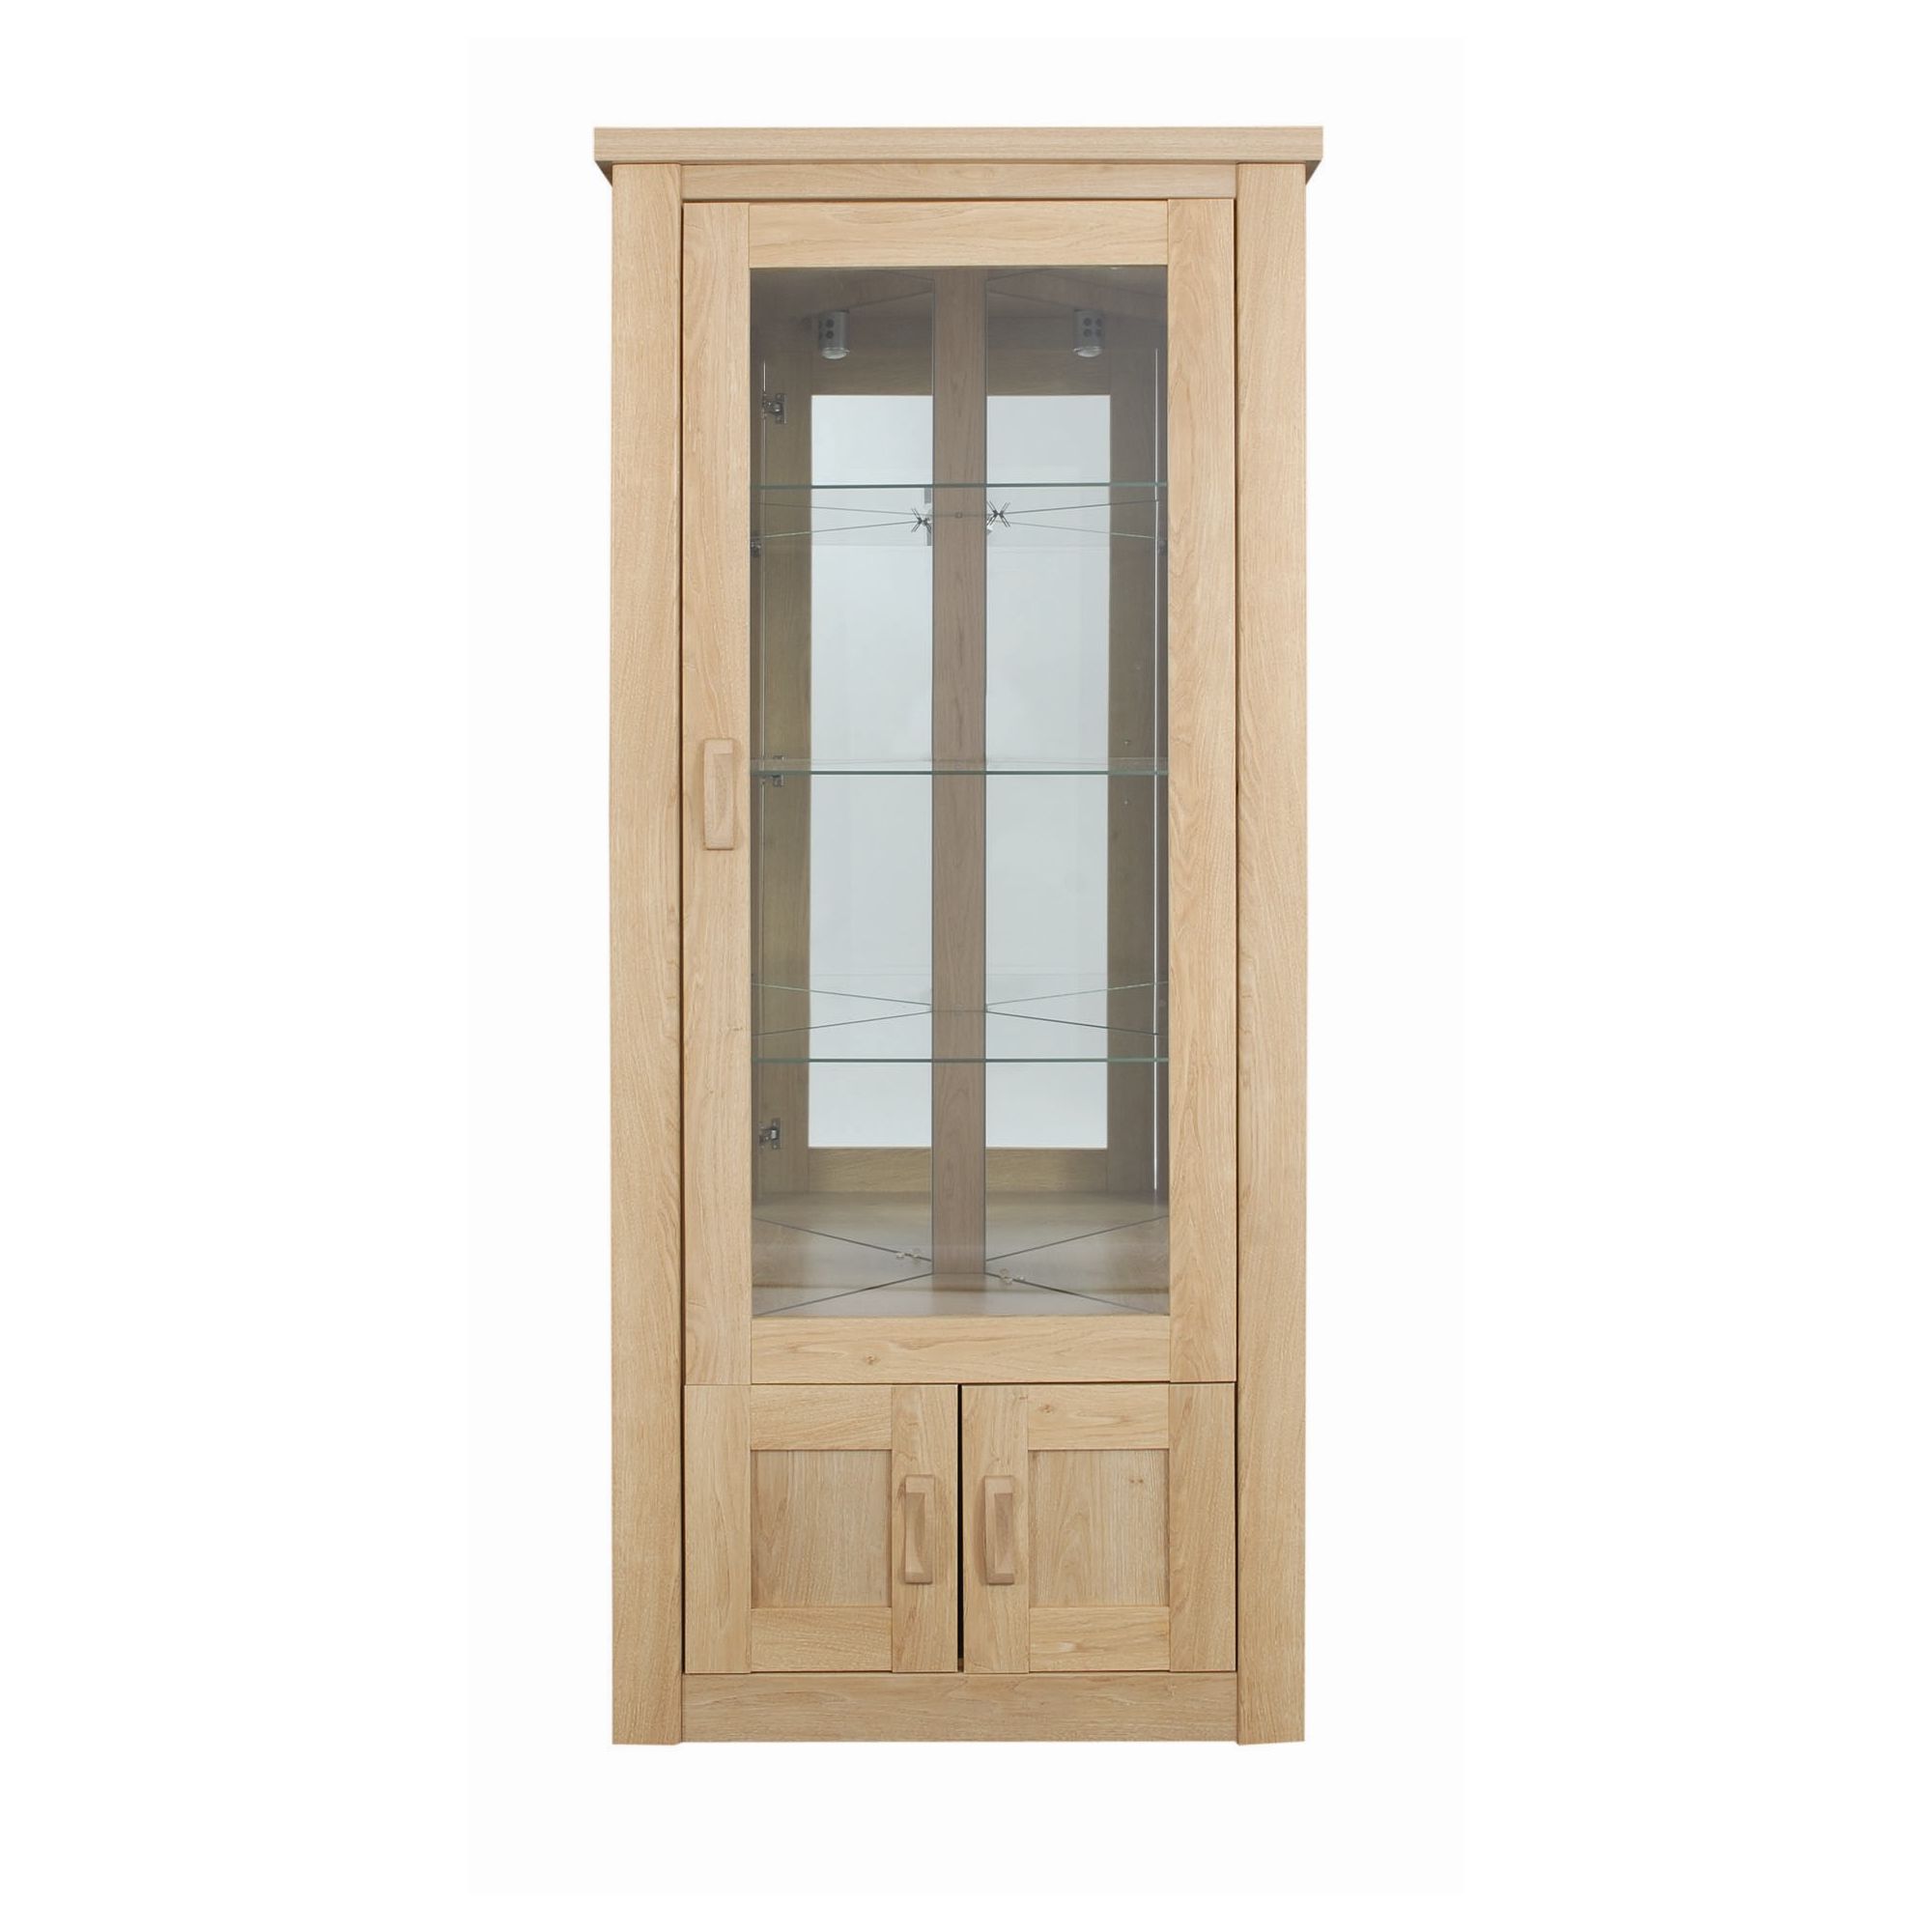 Caxton Countryman Free Standing Corner Cabinet in Chestnut at Tesco Direct